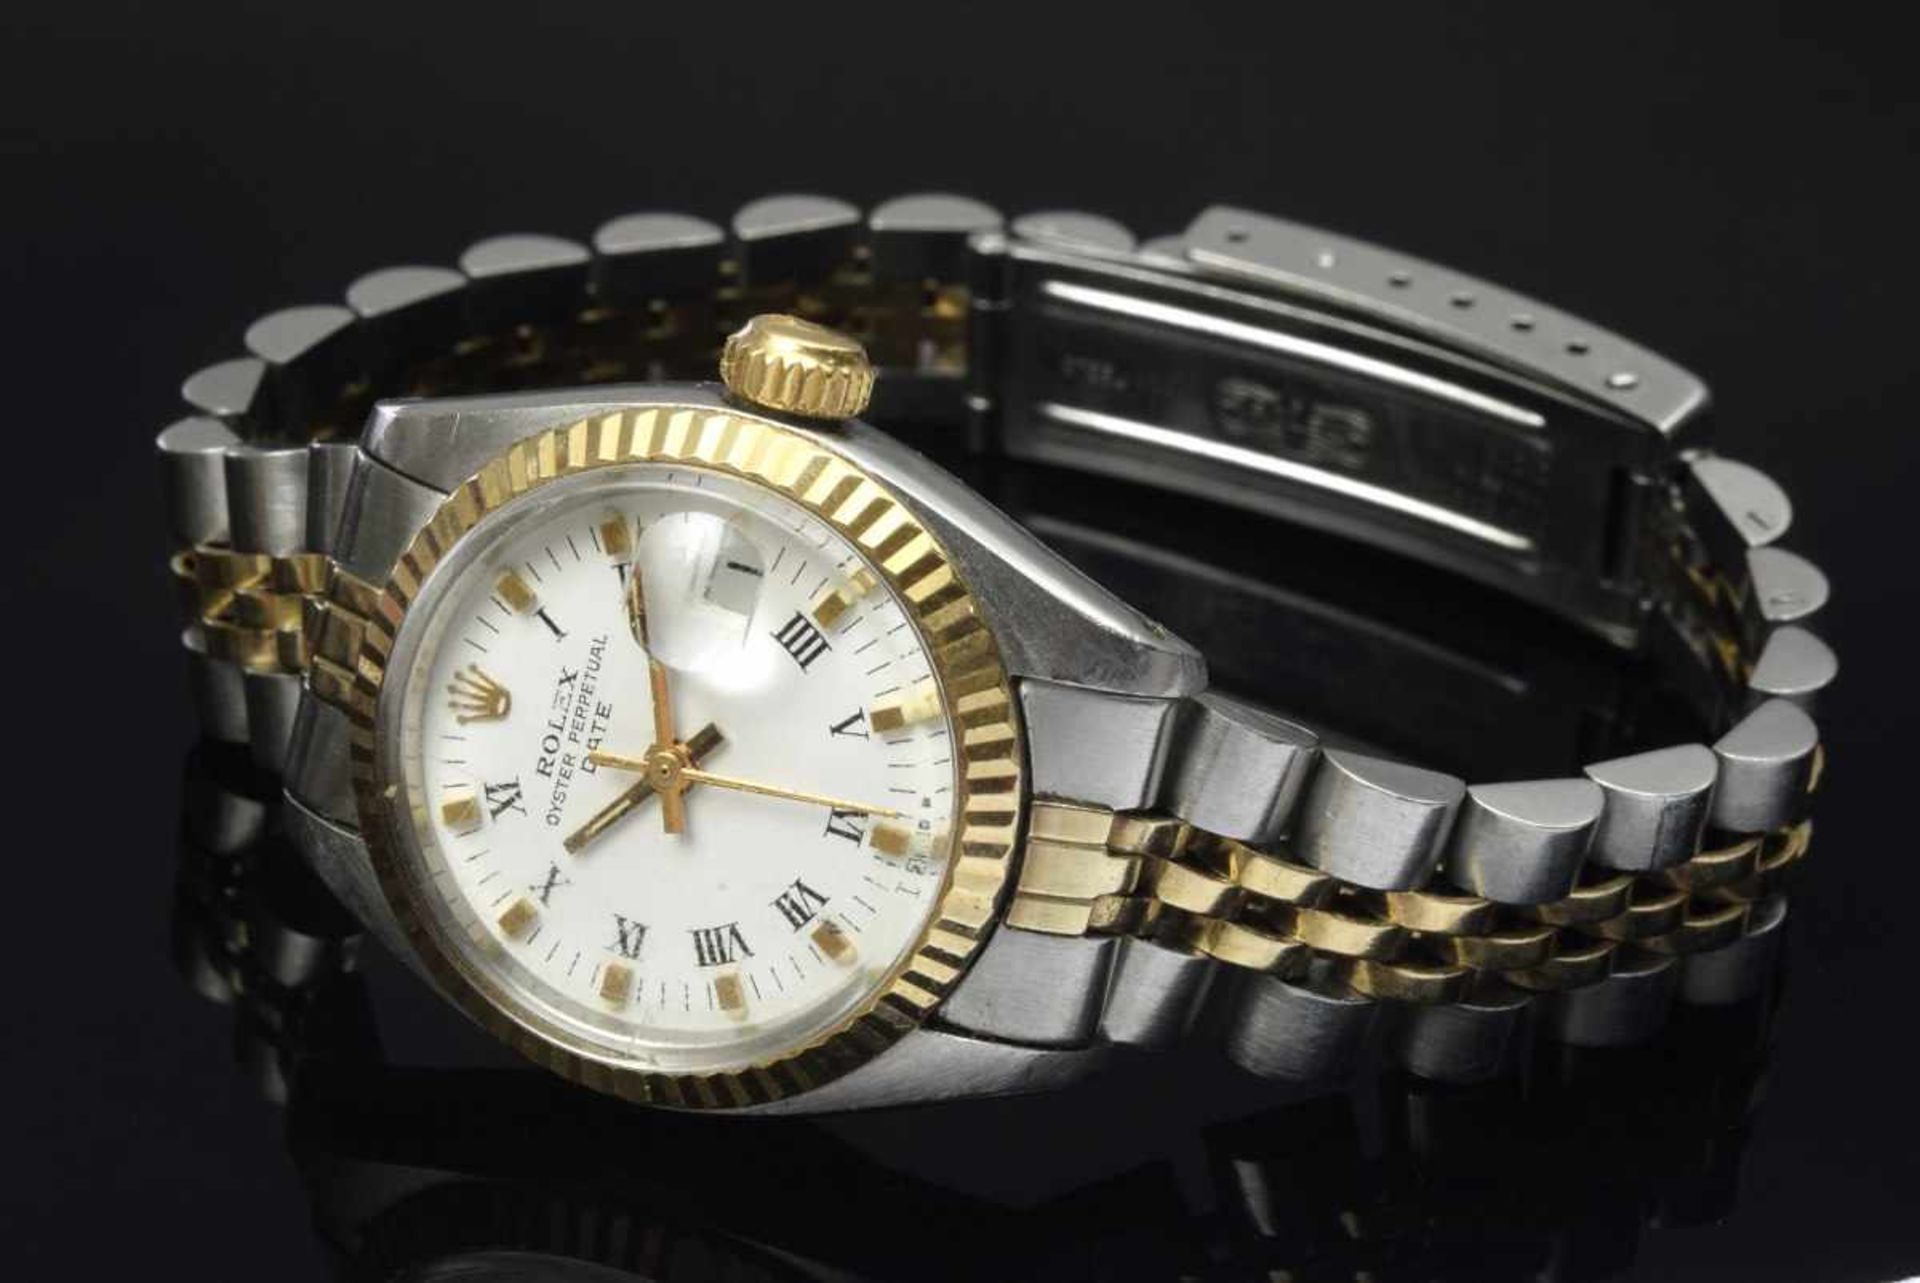 Rolex "Oyster Perpetual Lady Datejust", stainless steel/gold, automatic movement, white dial with